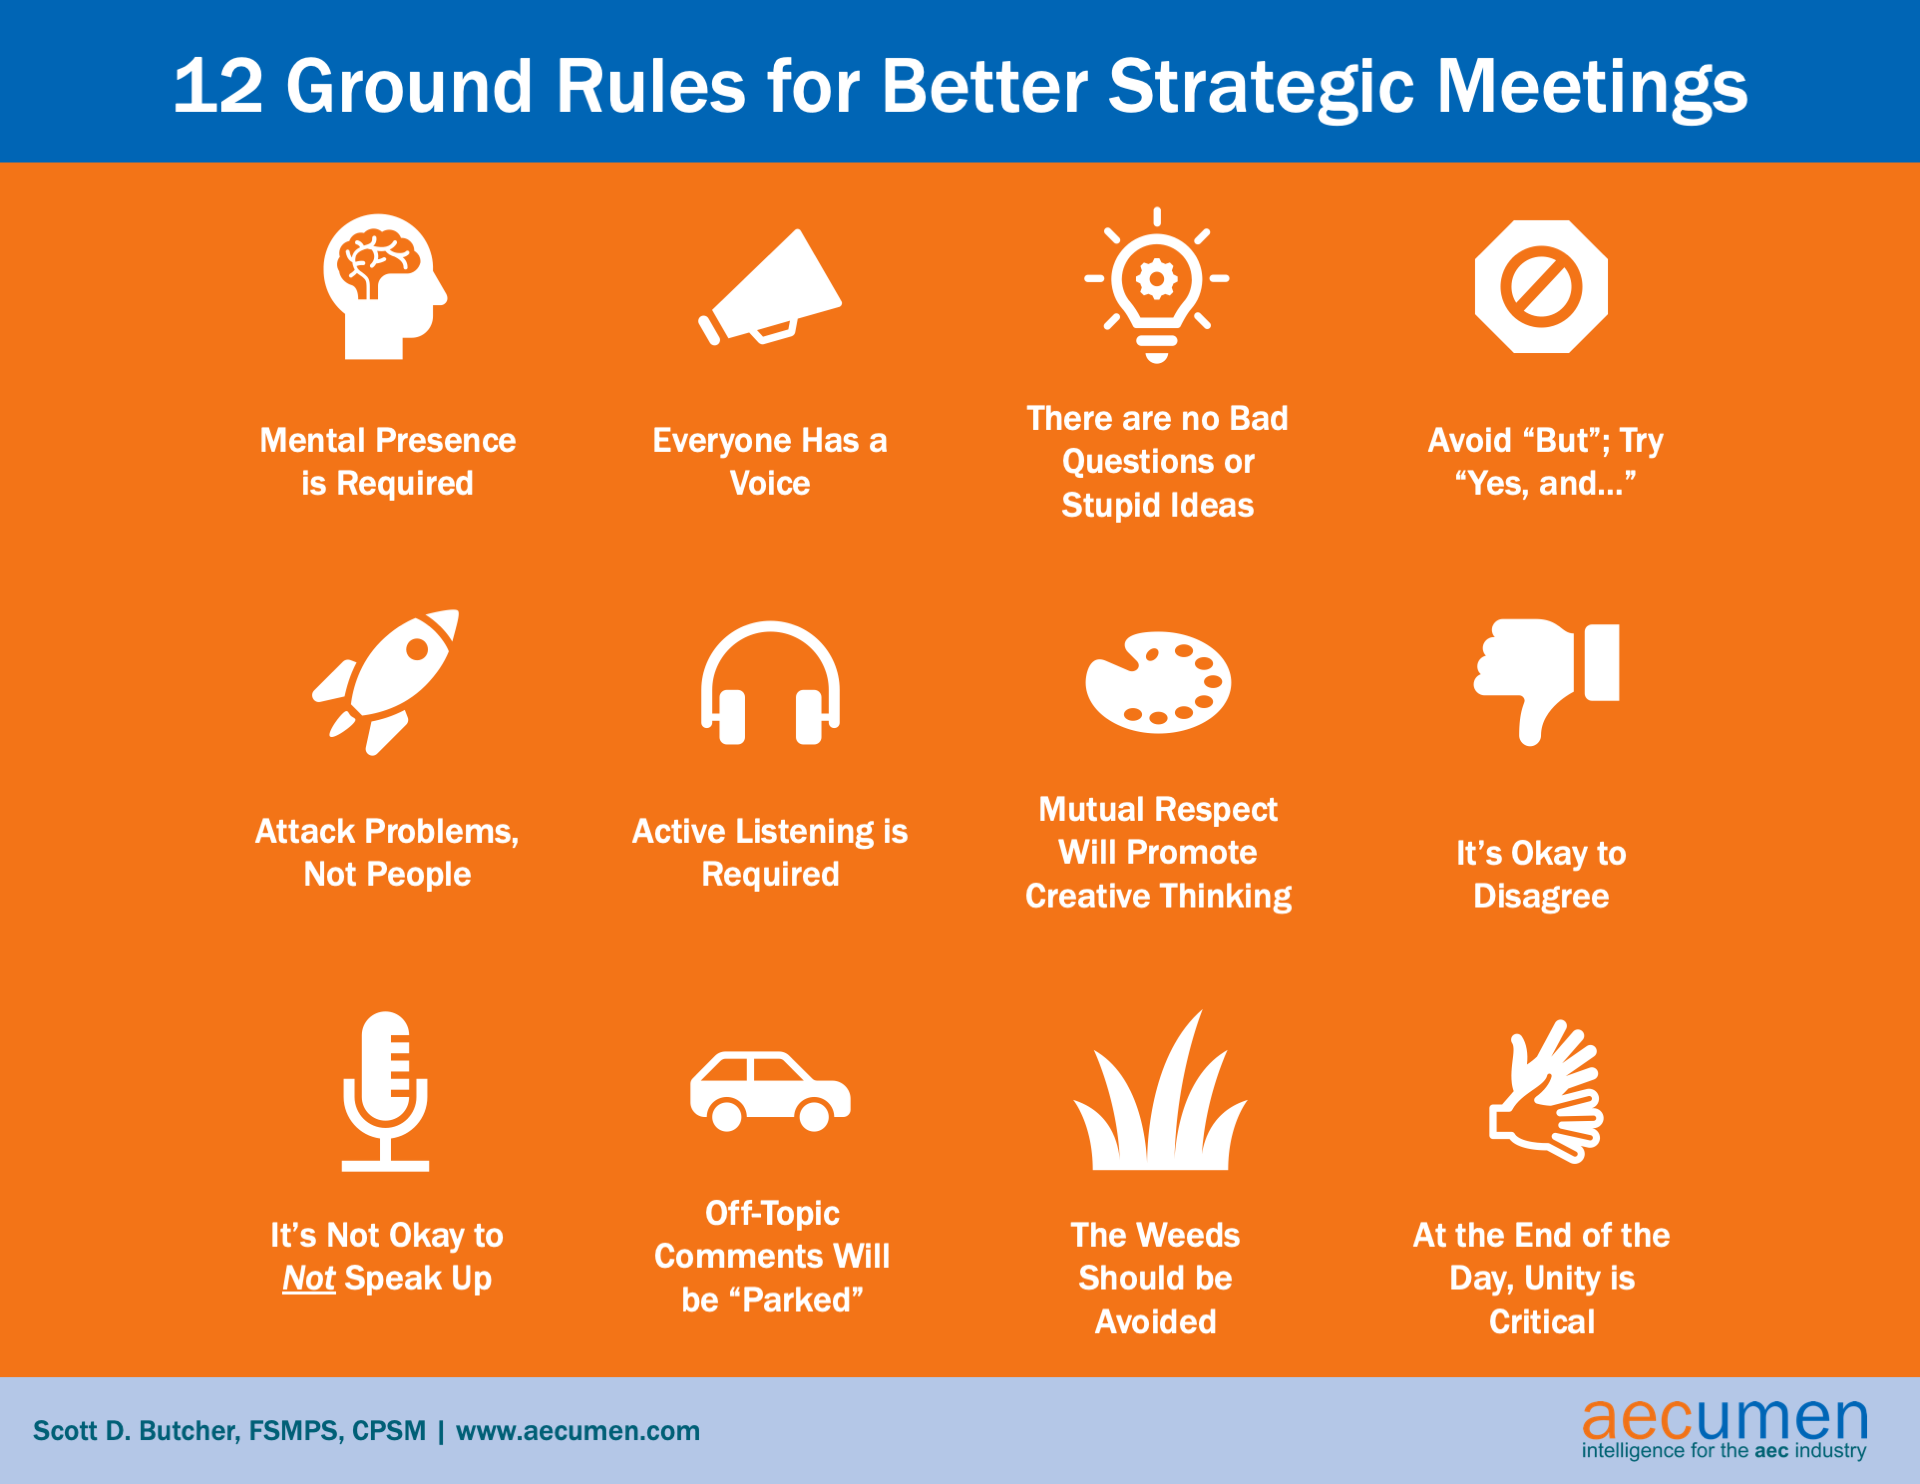 12 Ground Rules For Better Strategic Planning Meetings